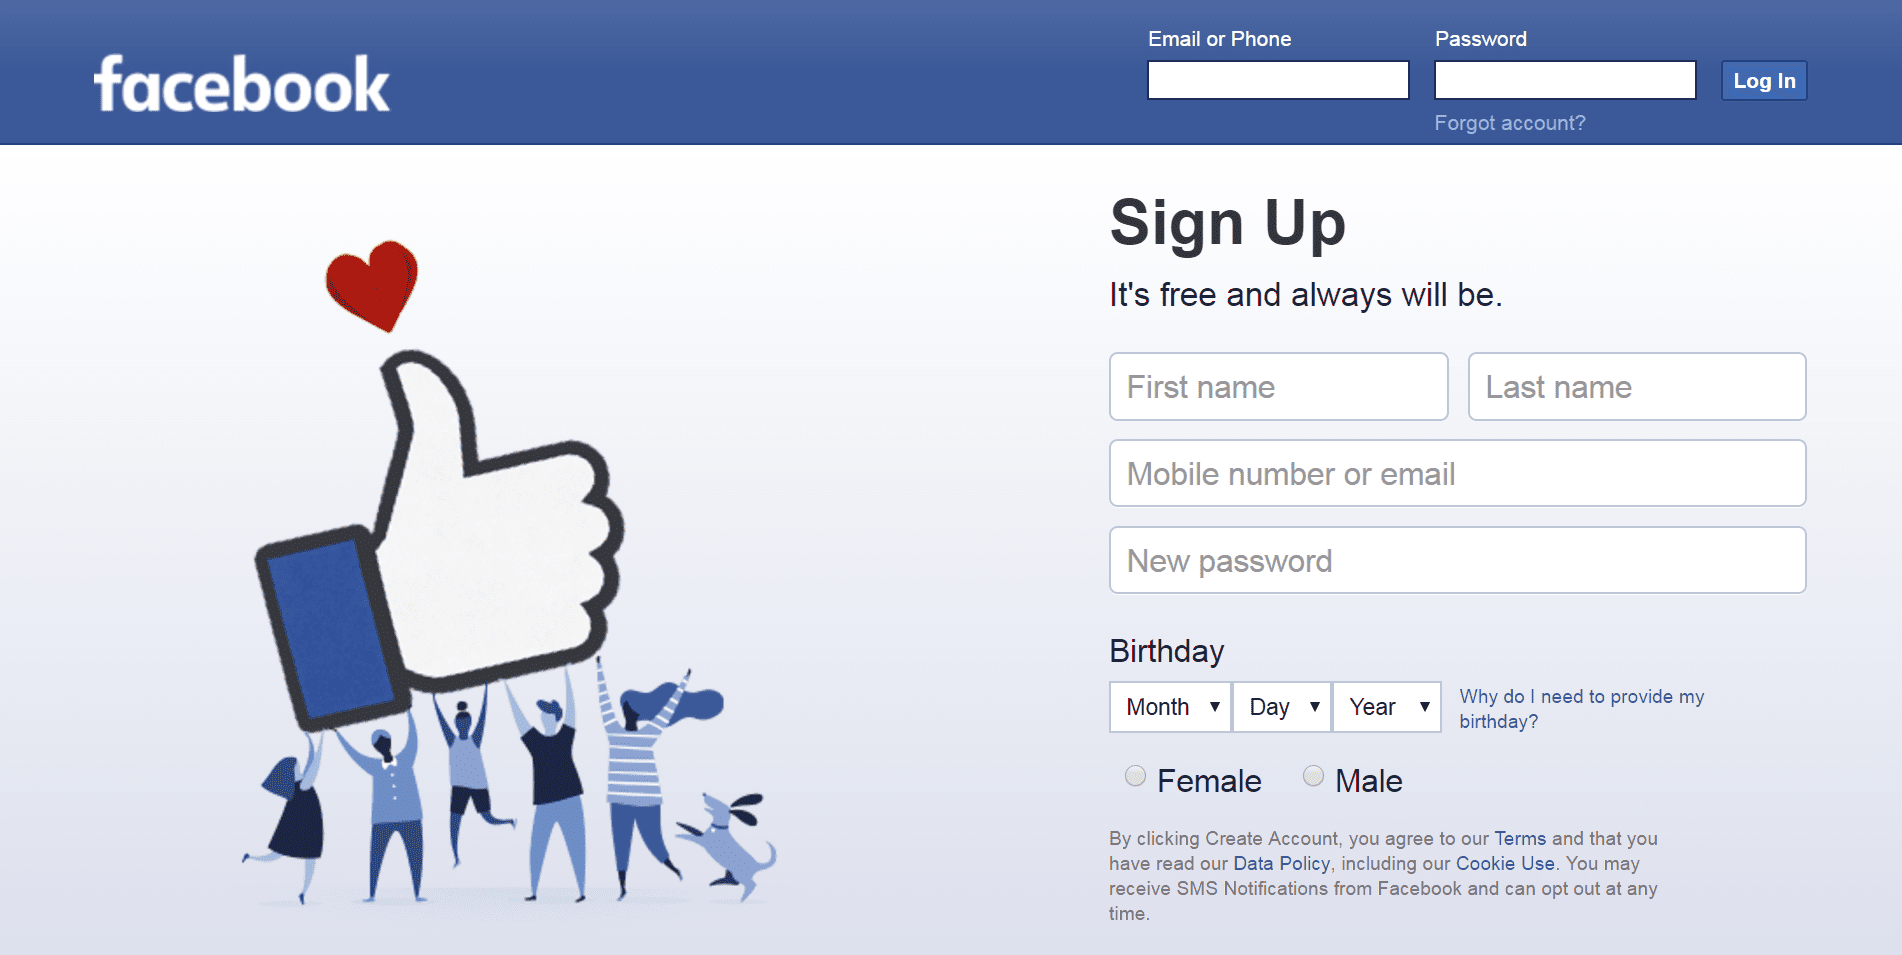 The Facebook home page.